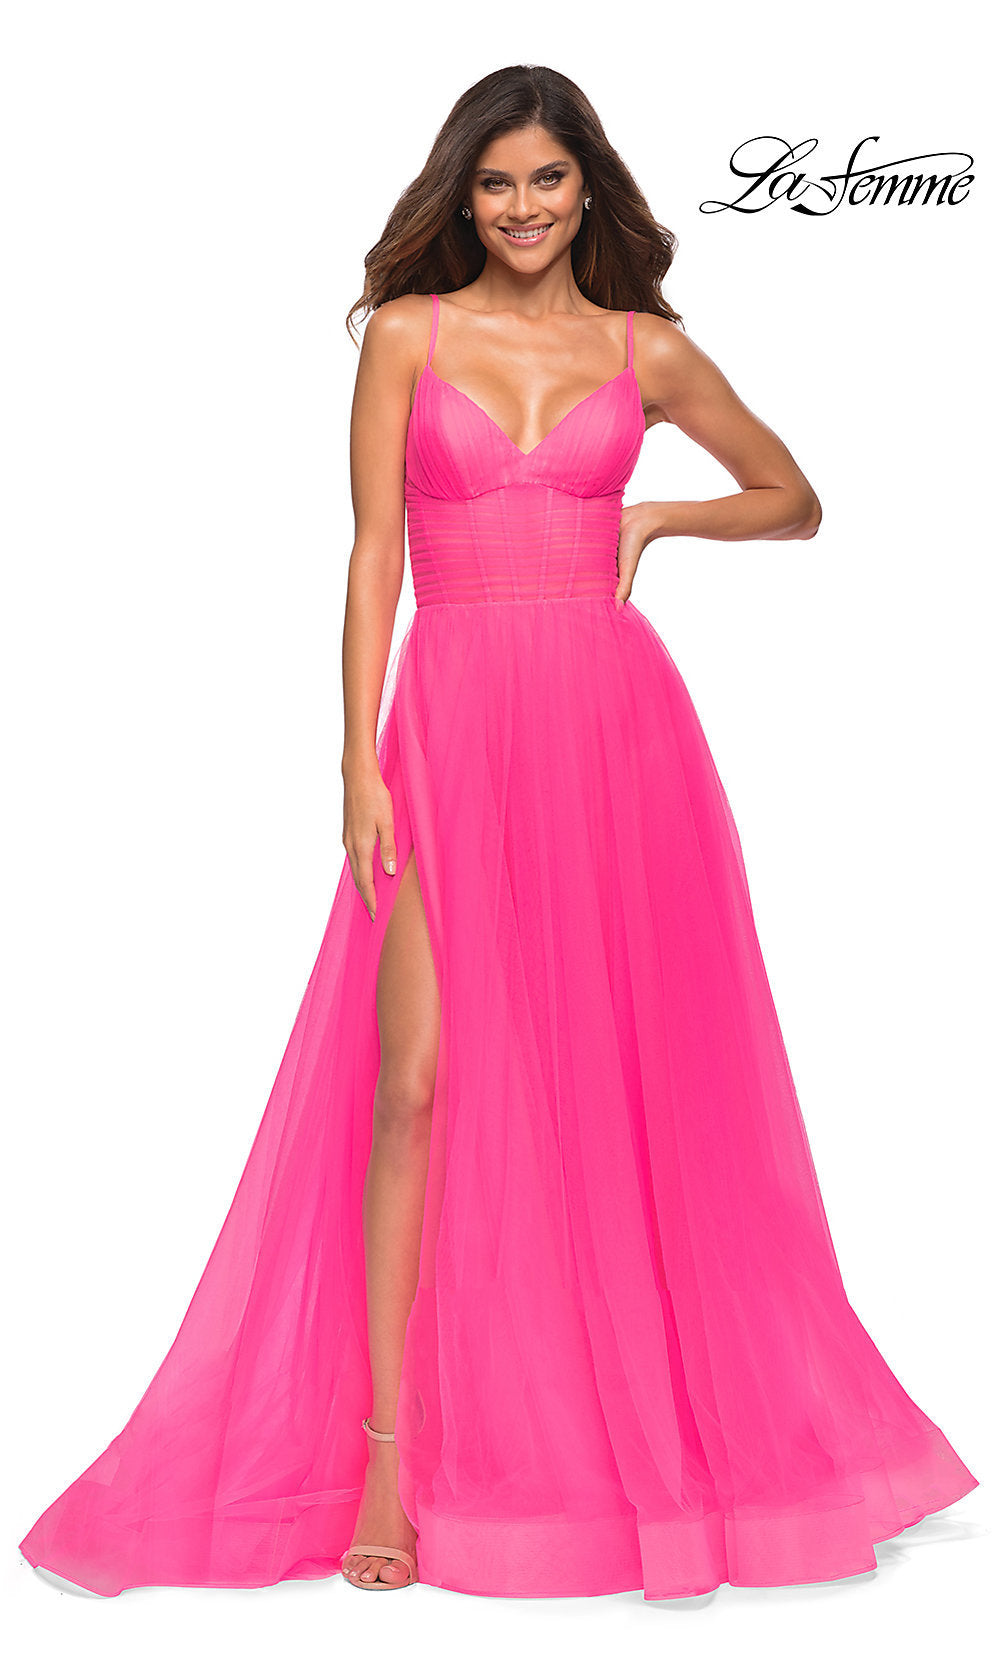 La Femme Long Neon Pink Prom Ball Gown with Pockets